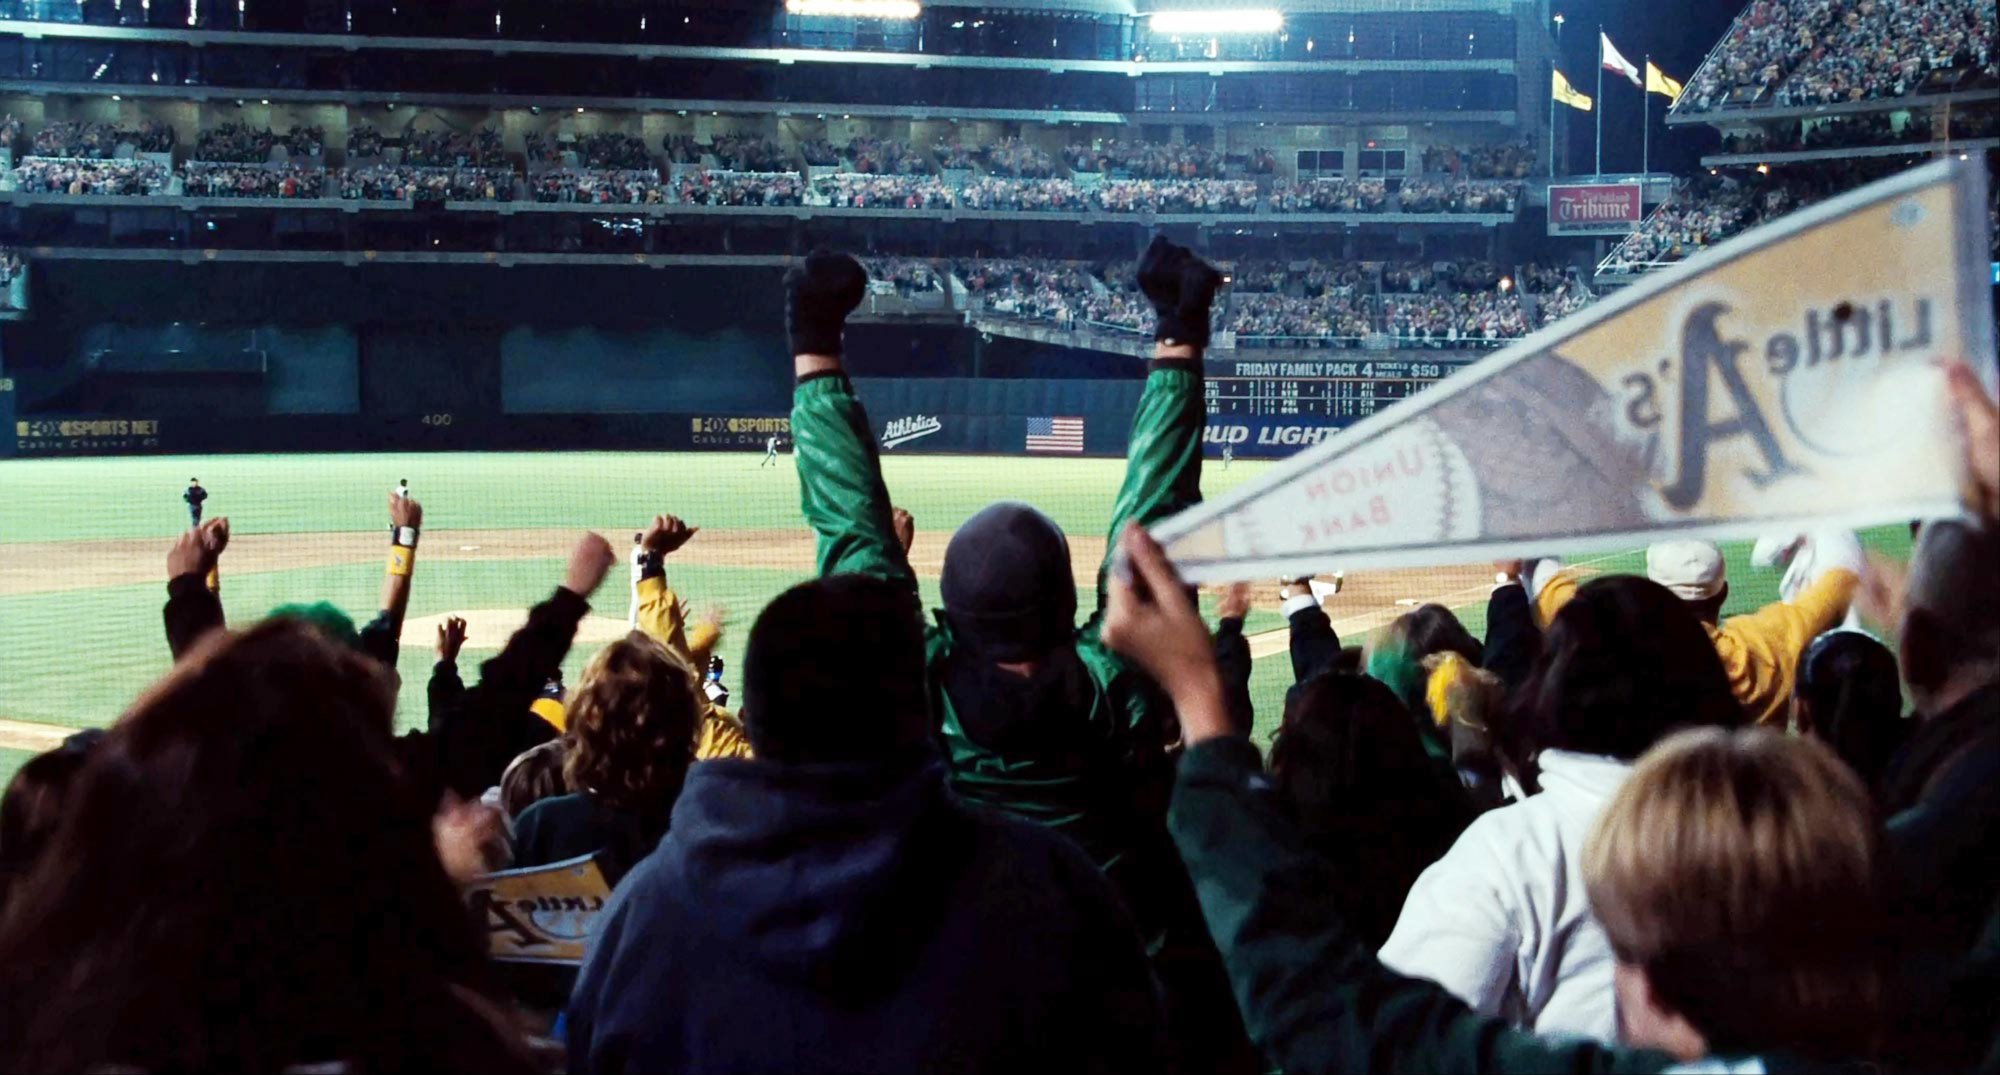 Crowd at a baseball game cheering, a person holds a sign, excitement visible